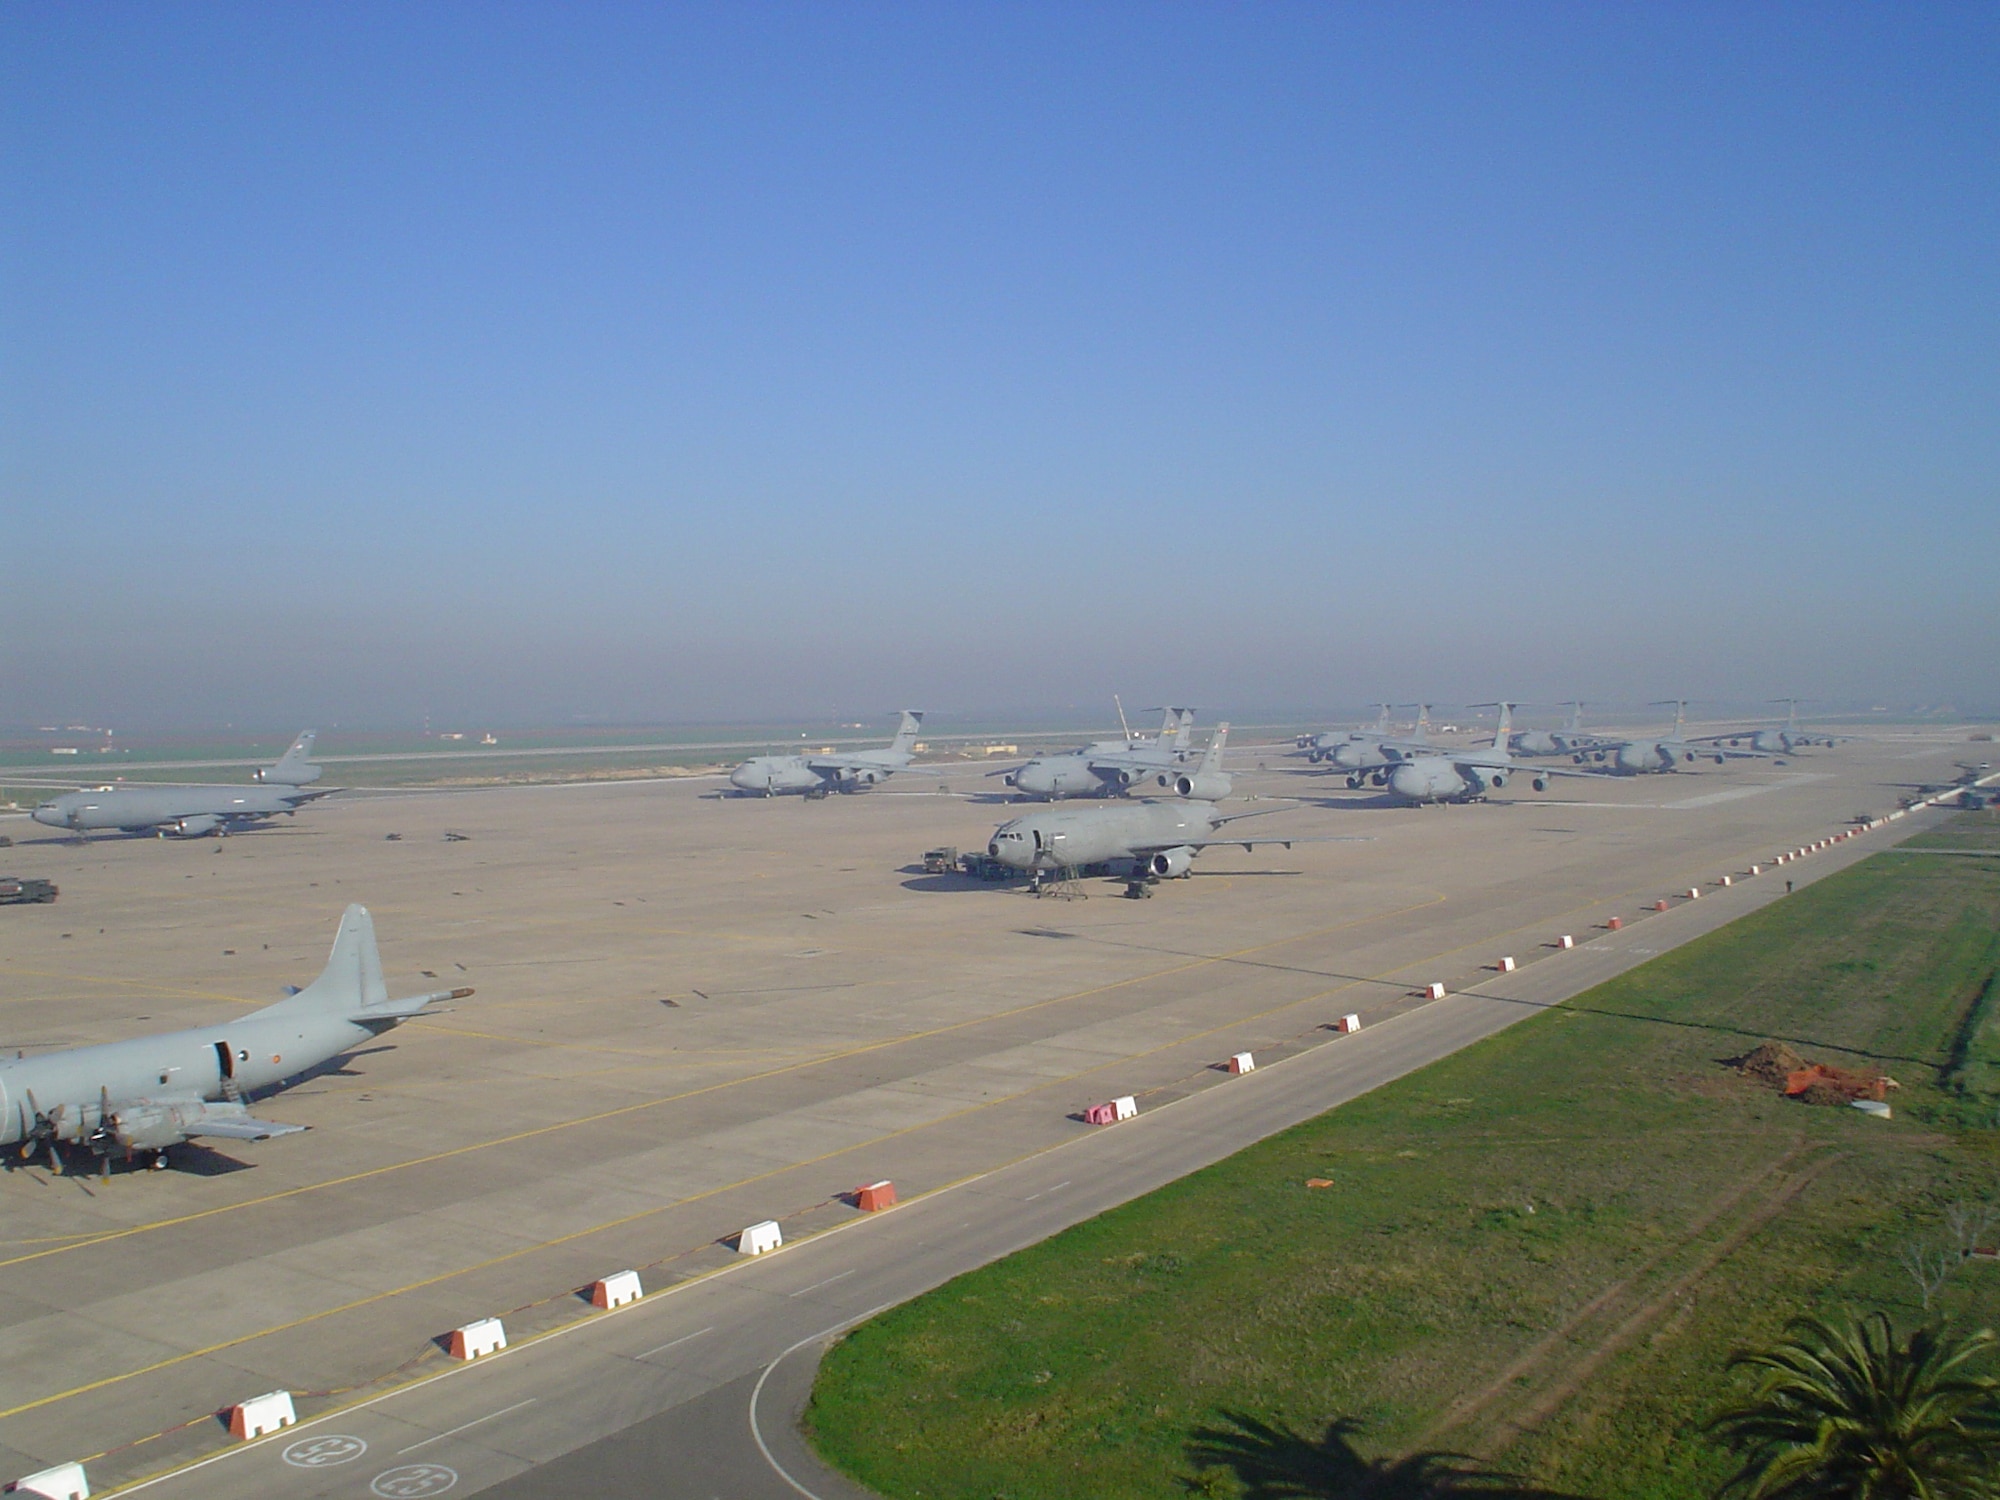 The 86th Airlift Wing’s 496th Air Base Squadron at Morón Air Base, Spain, supports an airfield bustling with aircraft coming in and out of theater in support of operations around the globe